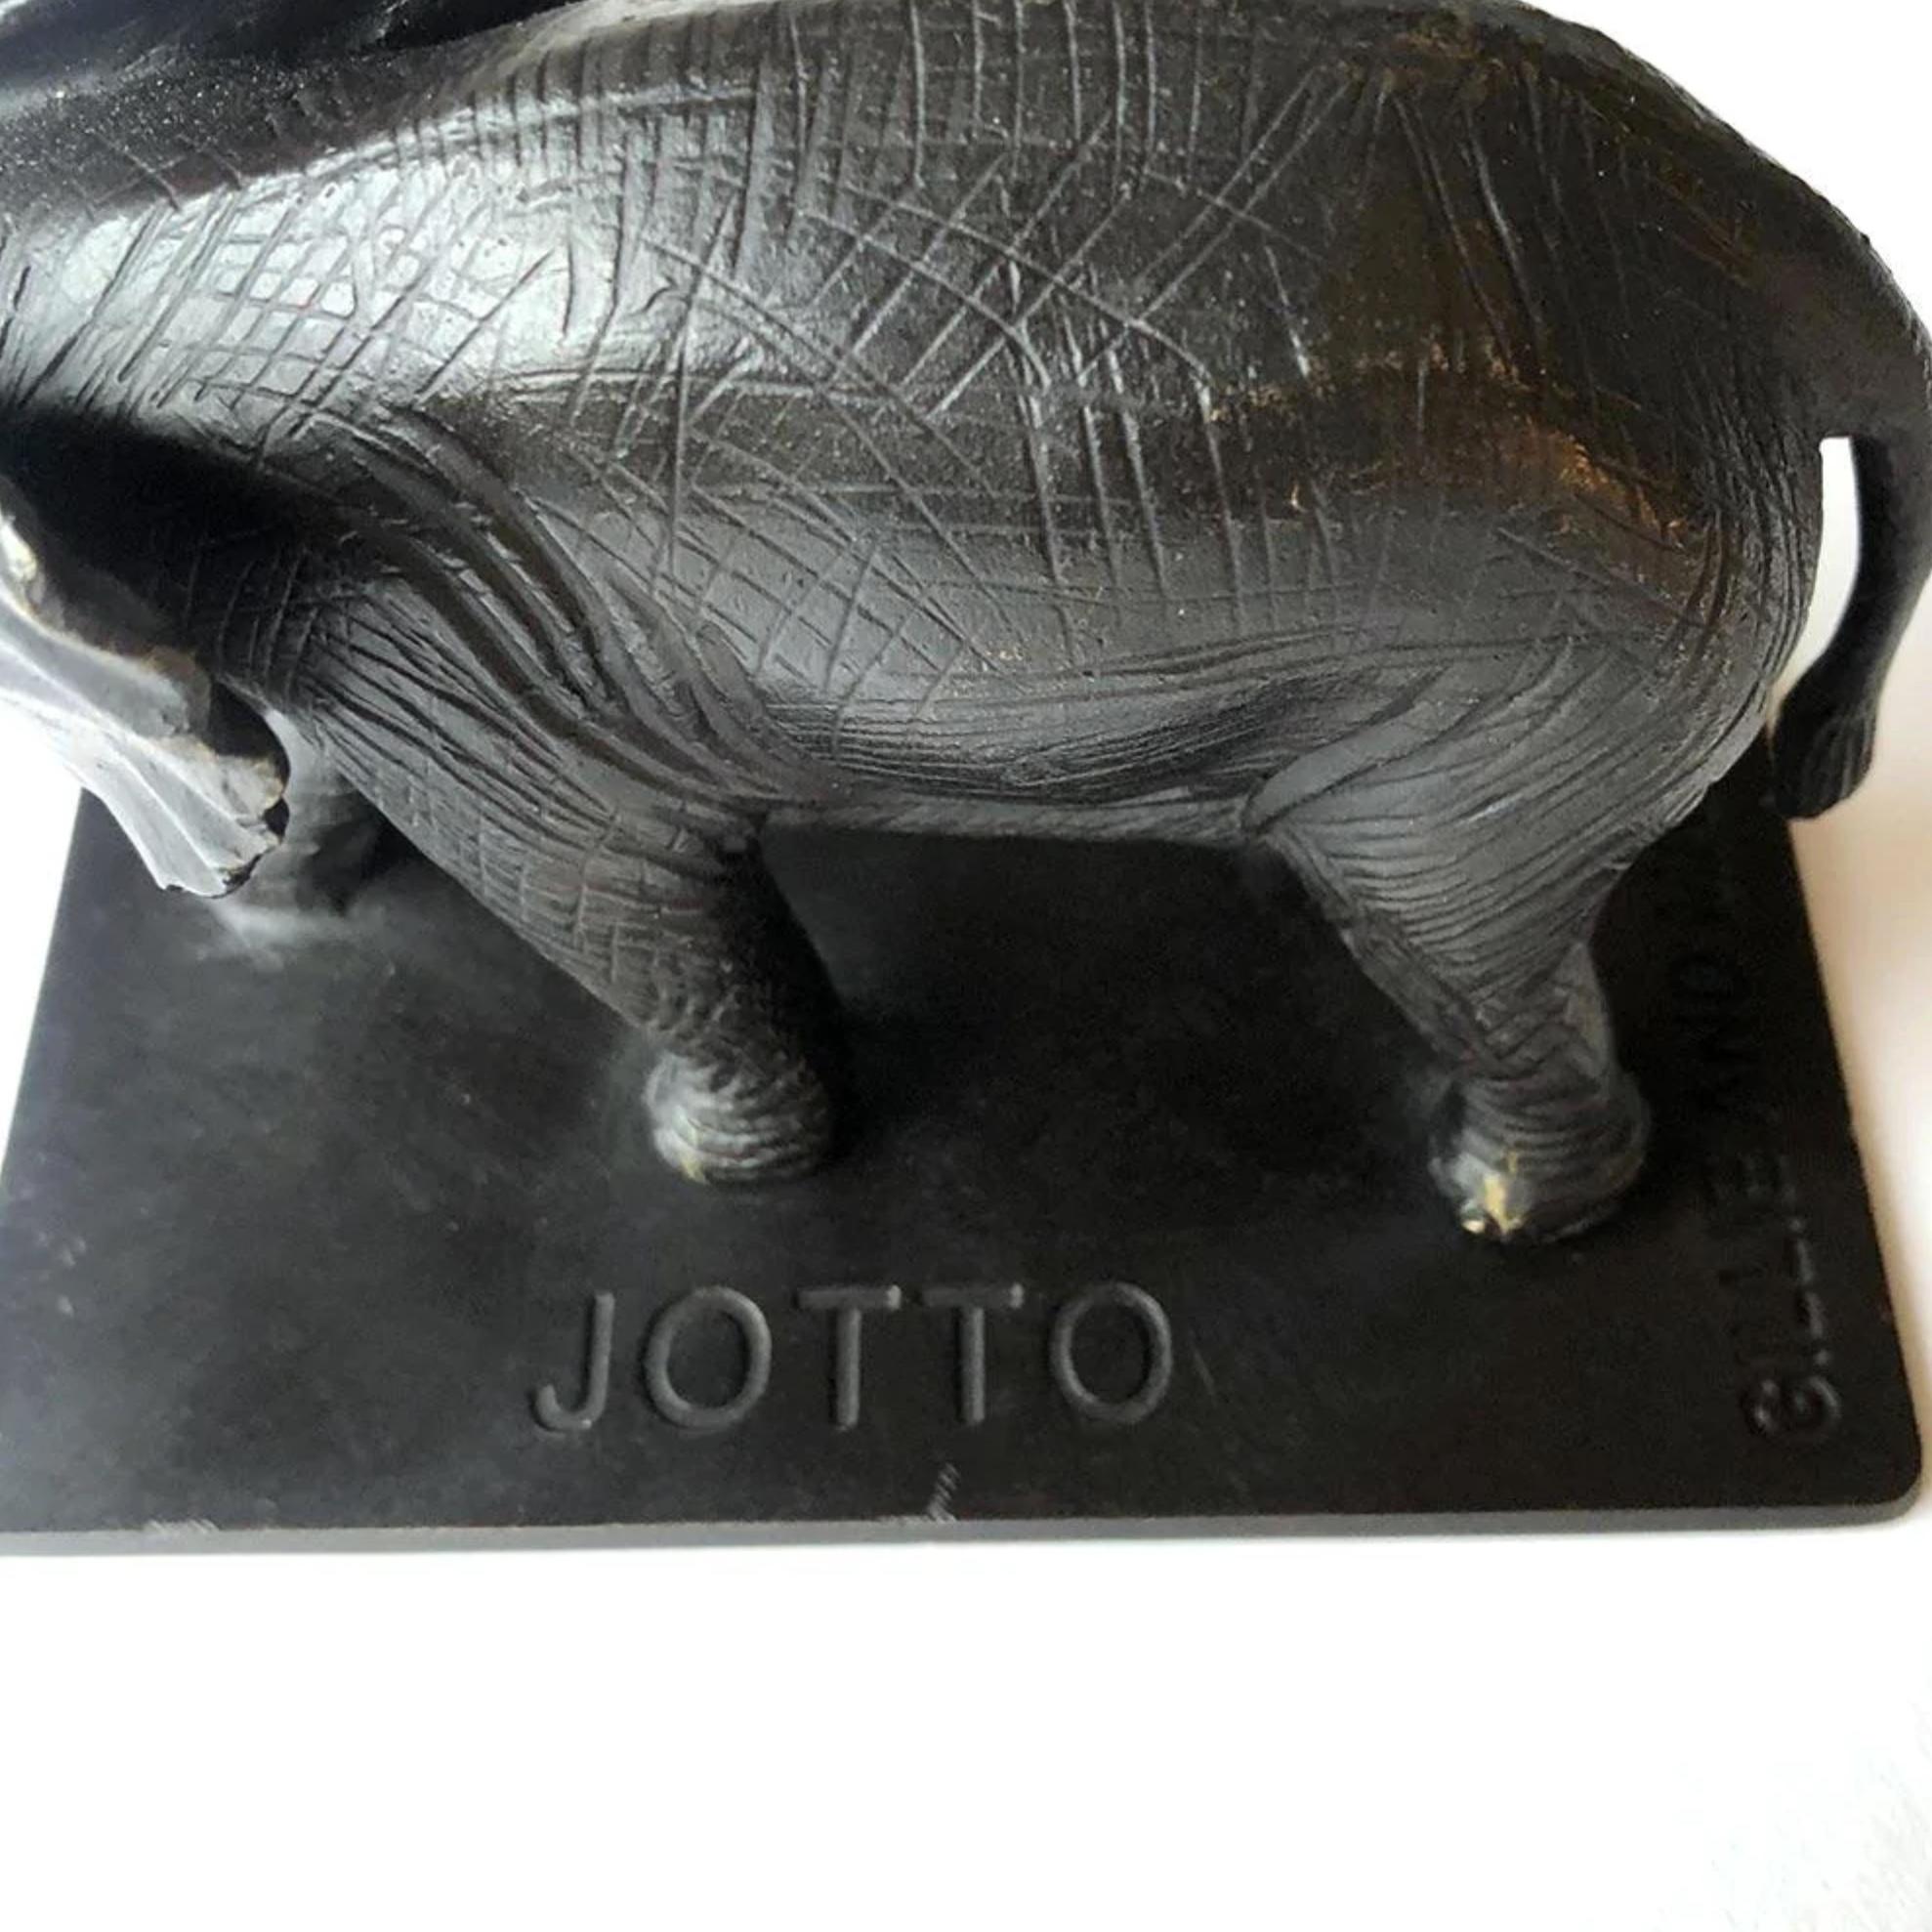 Authentic Bronze Orphan Jotto Elephant Sculpture by Gillie and Marc For Sale 7